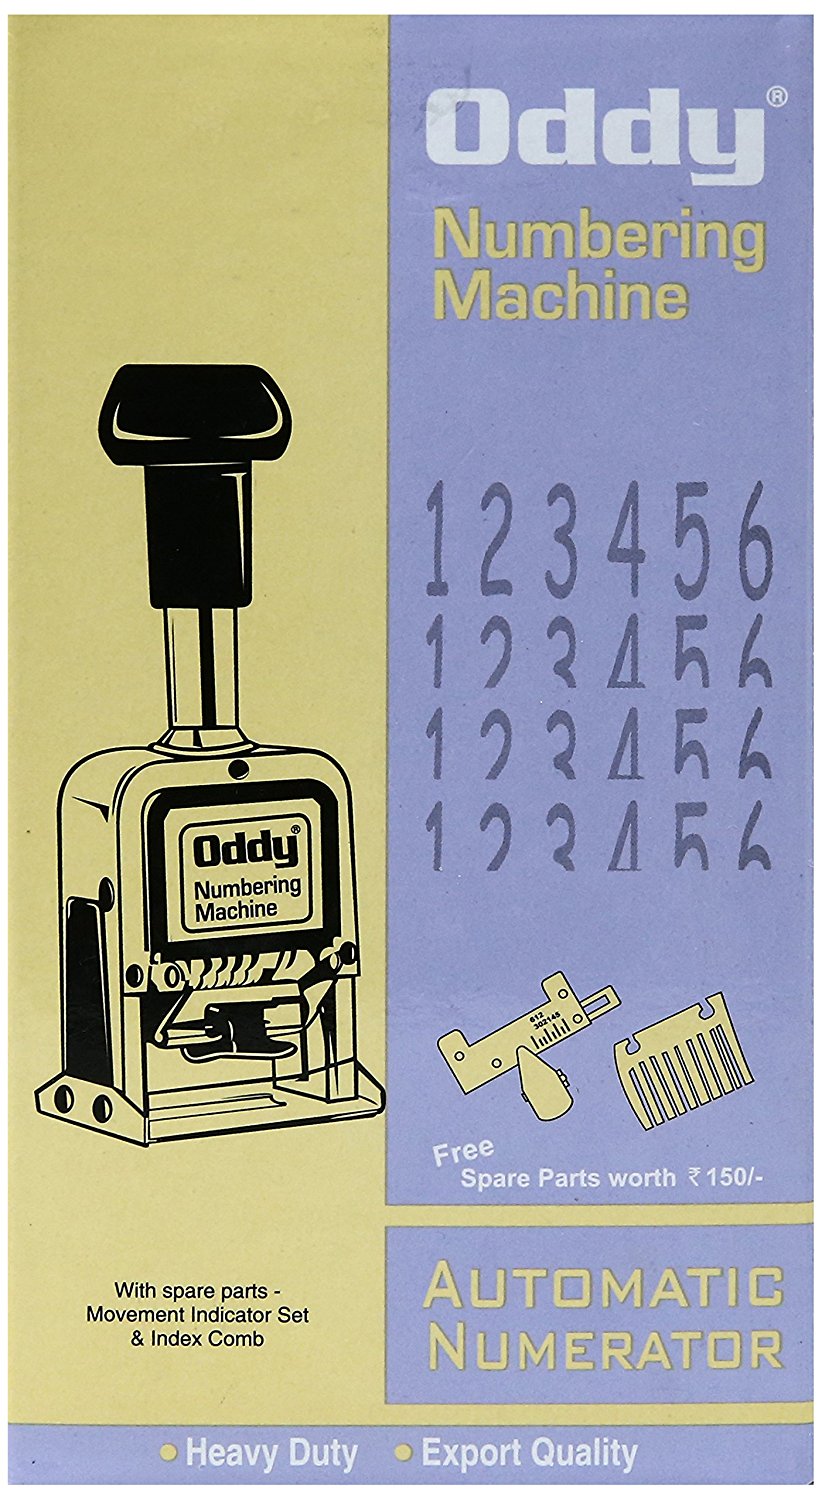 Oddy Numbering Machine 6 Digits With Spare Parts (Automatic Numerator)